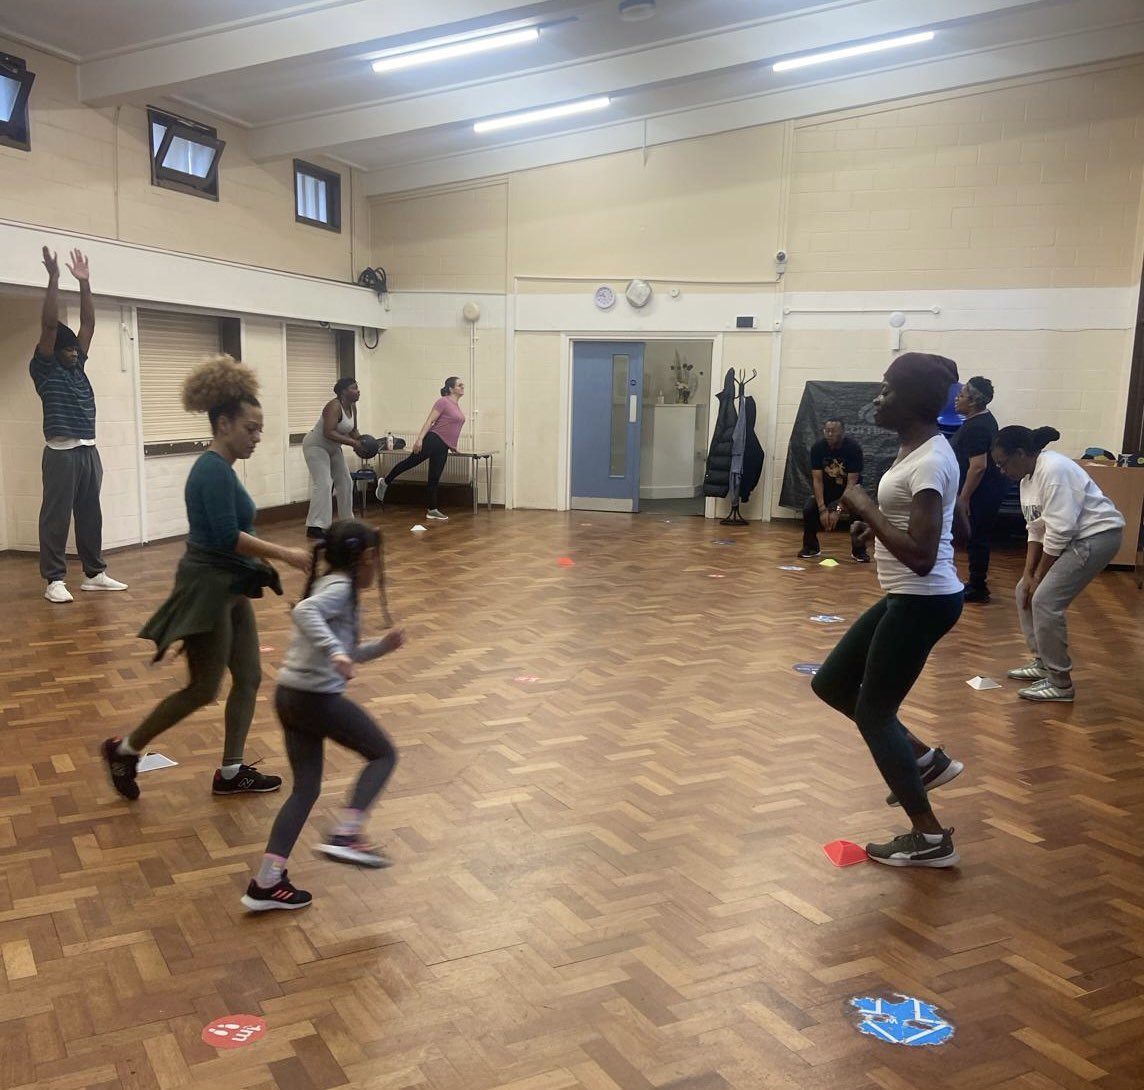 SMP Family Fitness Club alive and kicking on Tulse Hill Estate. Every Saturday morning - get in touch if you fancy a free, fun workout. 👊